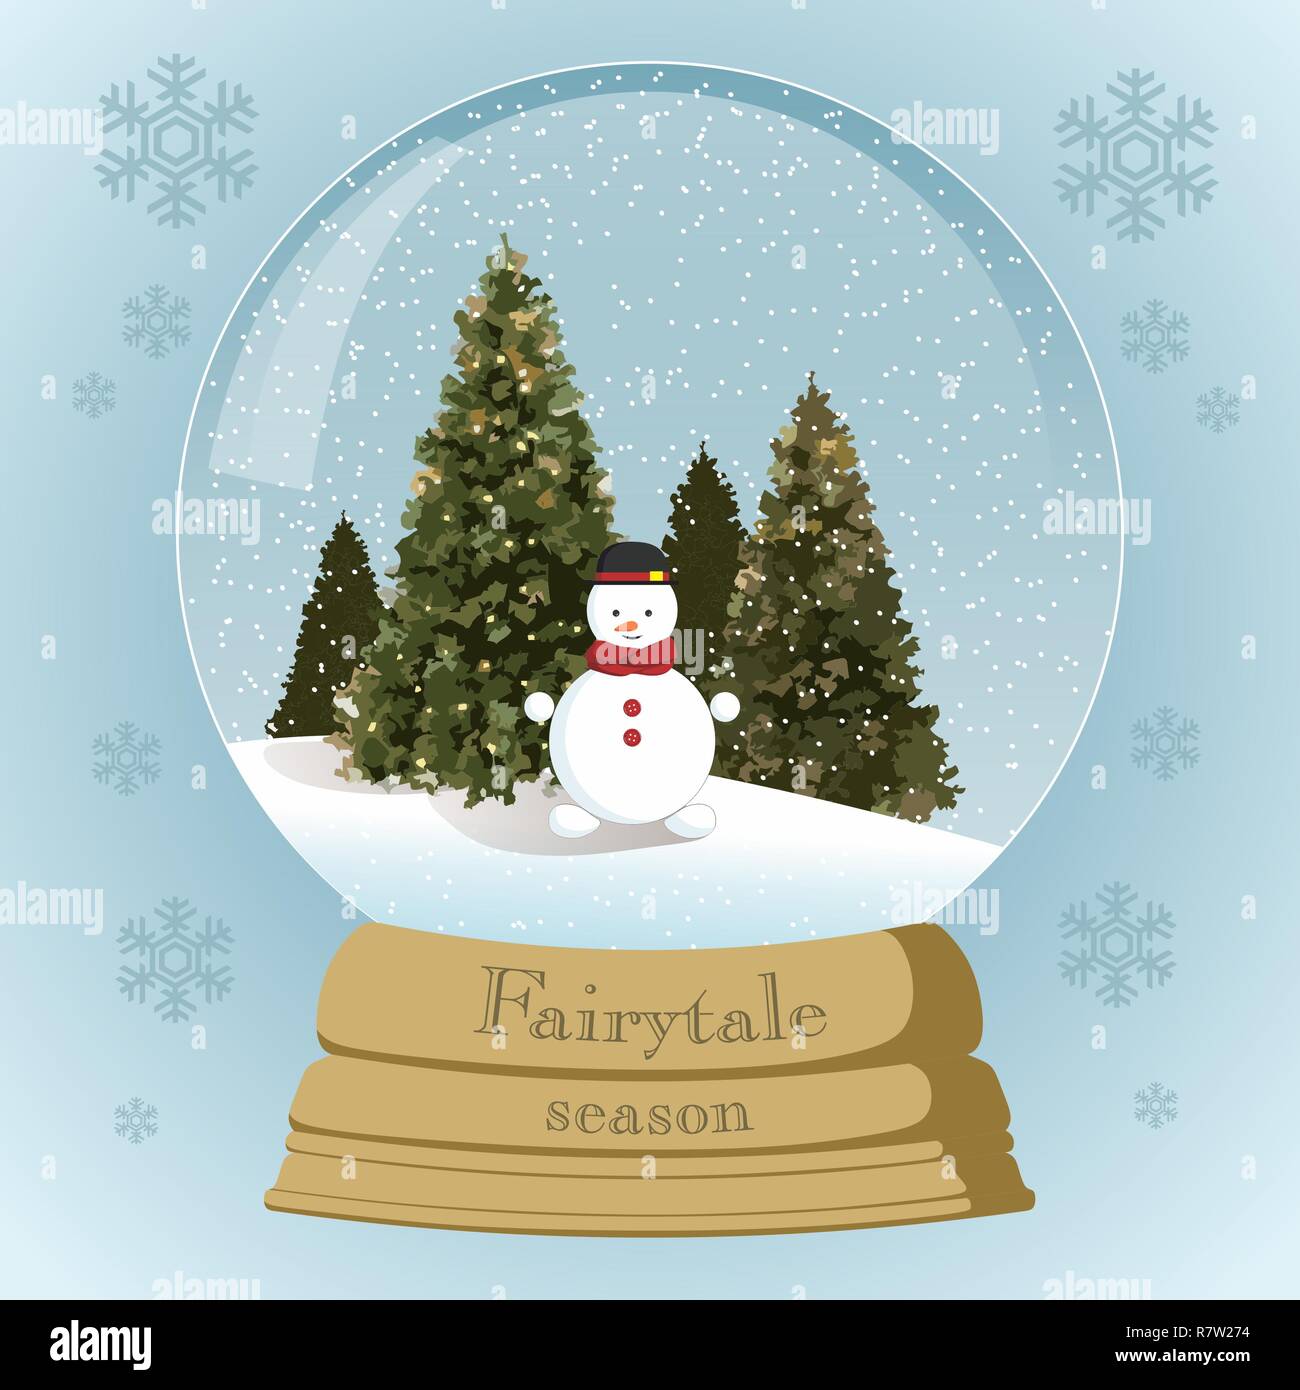 Christmas glass-ball with snowman in forest Stock Photo